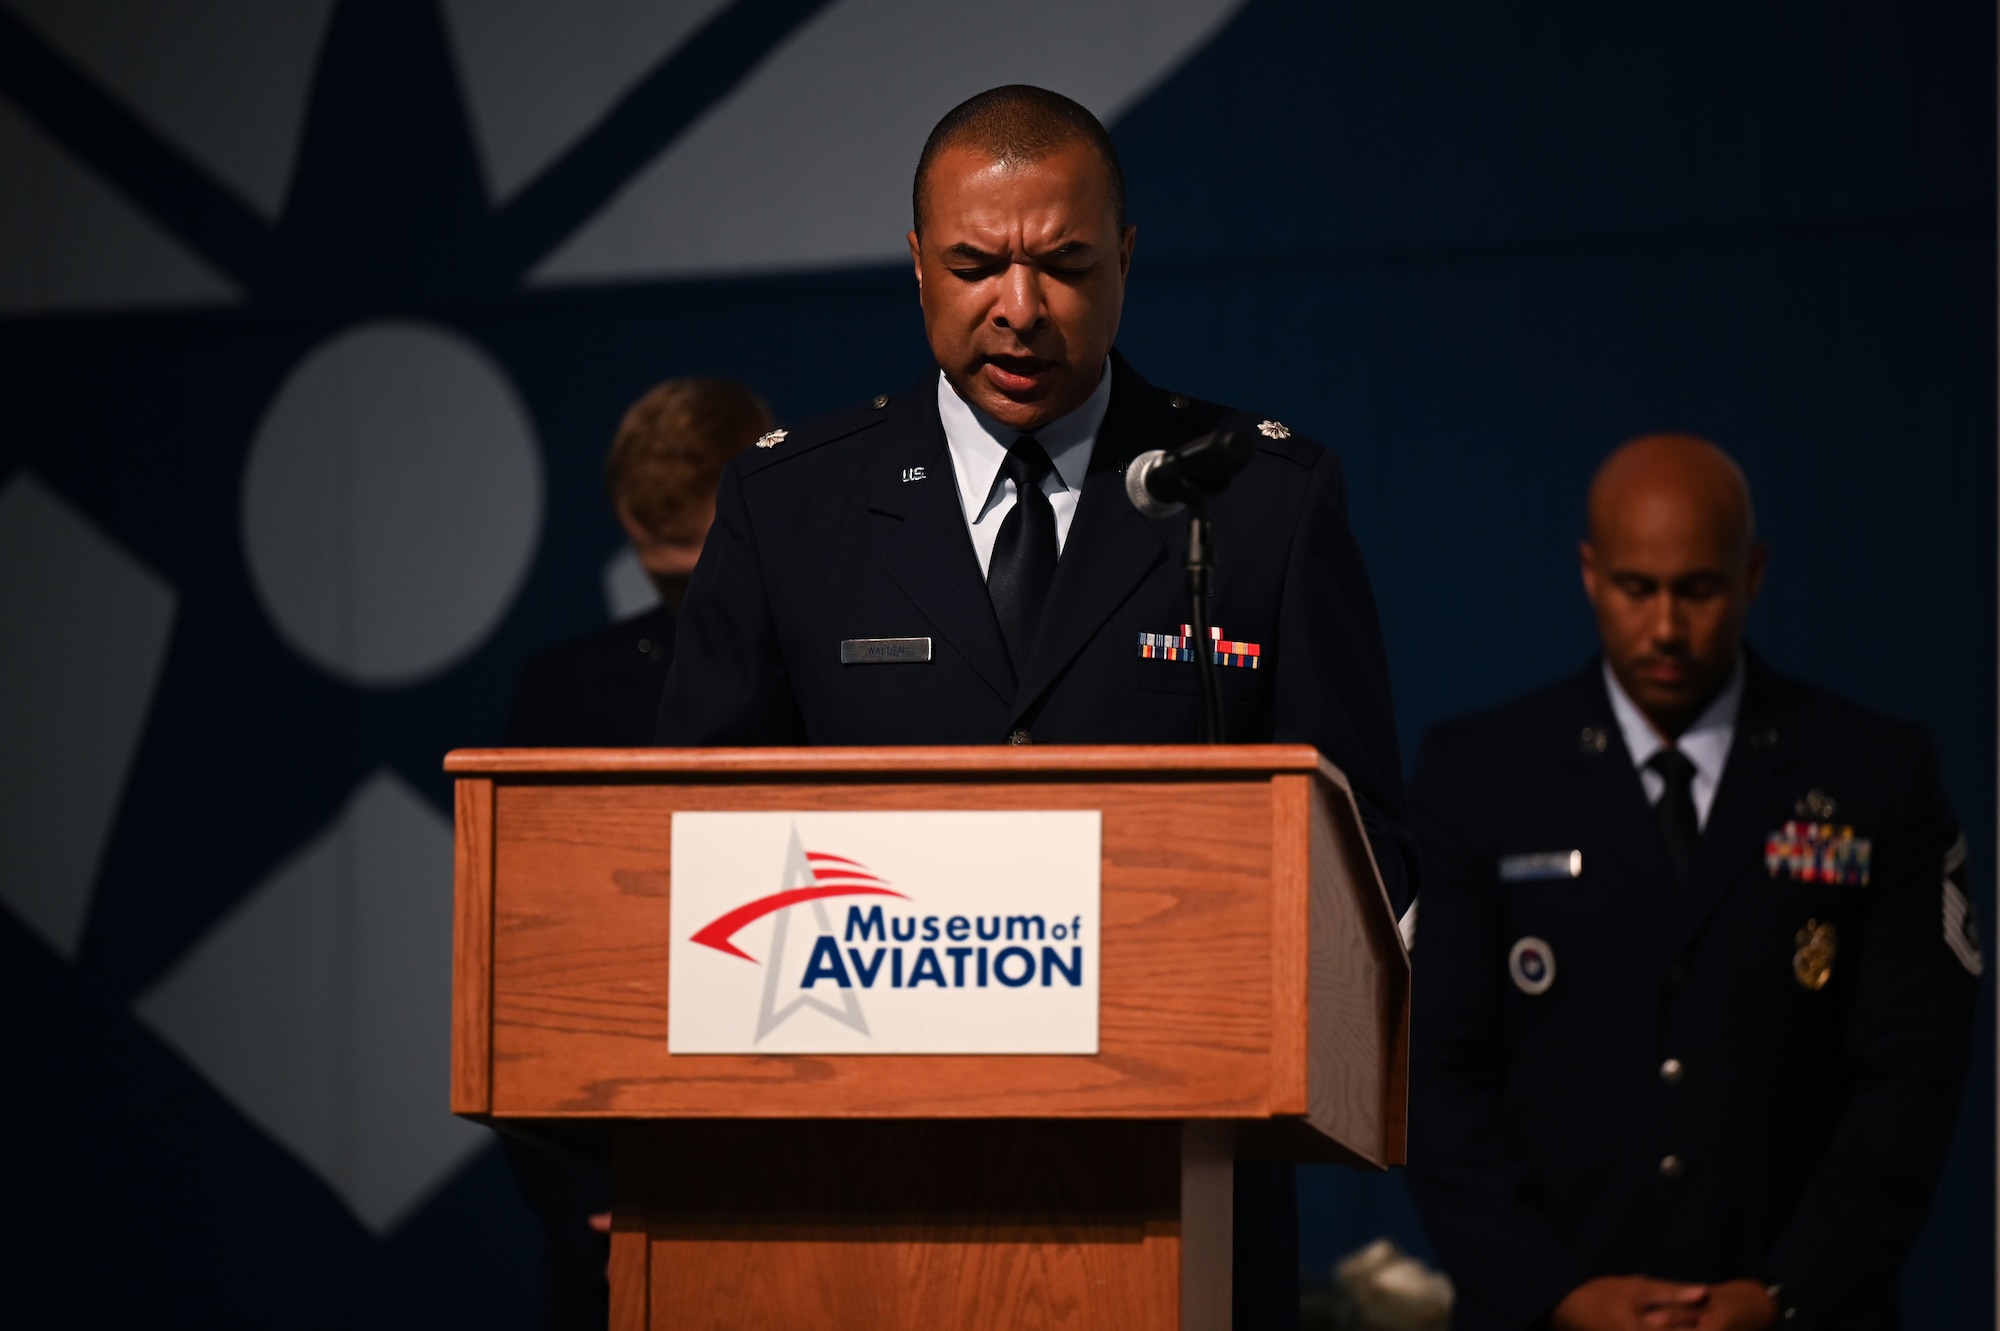 U.S. Air Force Lt. Col. Christopher Reeder, senior installation chaplain, gives an opening prayer for the activation ceremony for the 350th Spectrum Warfare Wing, Detachment 1 and the 87th Electronic Warfare Squadron, Detachment 1 at Robins Air Force Base, GA, Oct. 25, 2023. The detachments are part of an activation process for the future 950th Spectrum Warfare Group. (U.S. Air Force photo by Staff Sgt. Ericka A. Woolever)